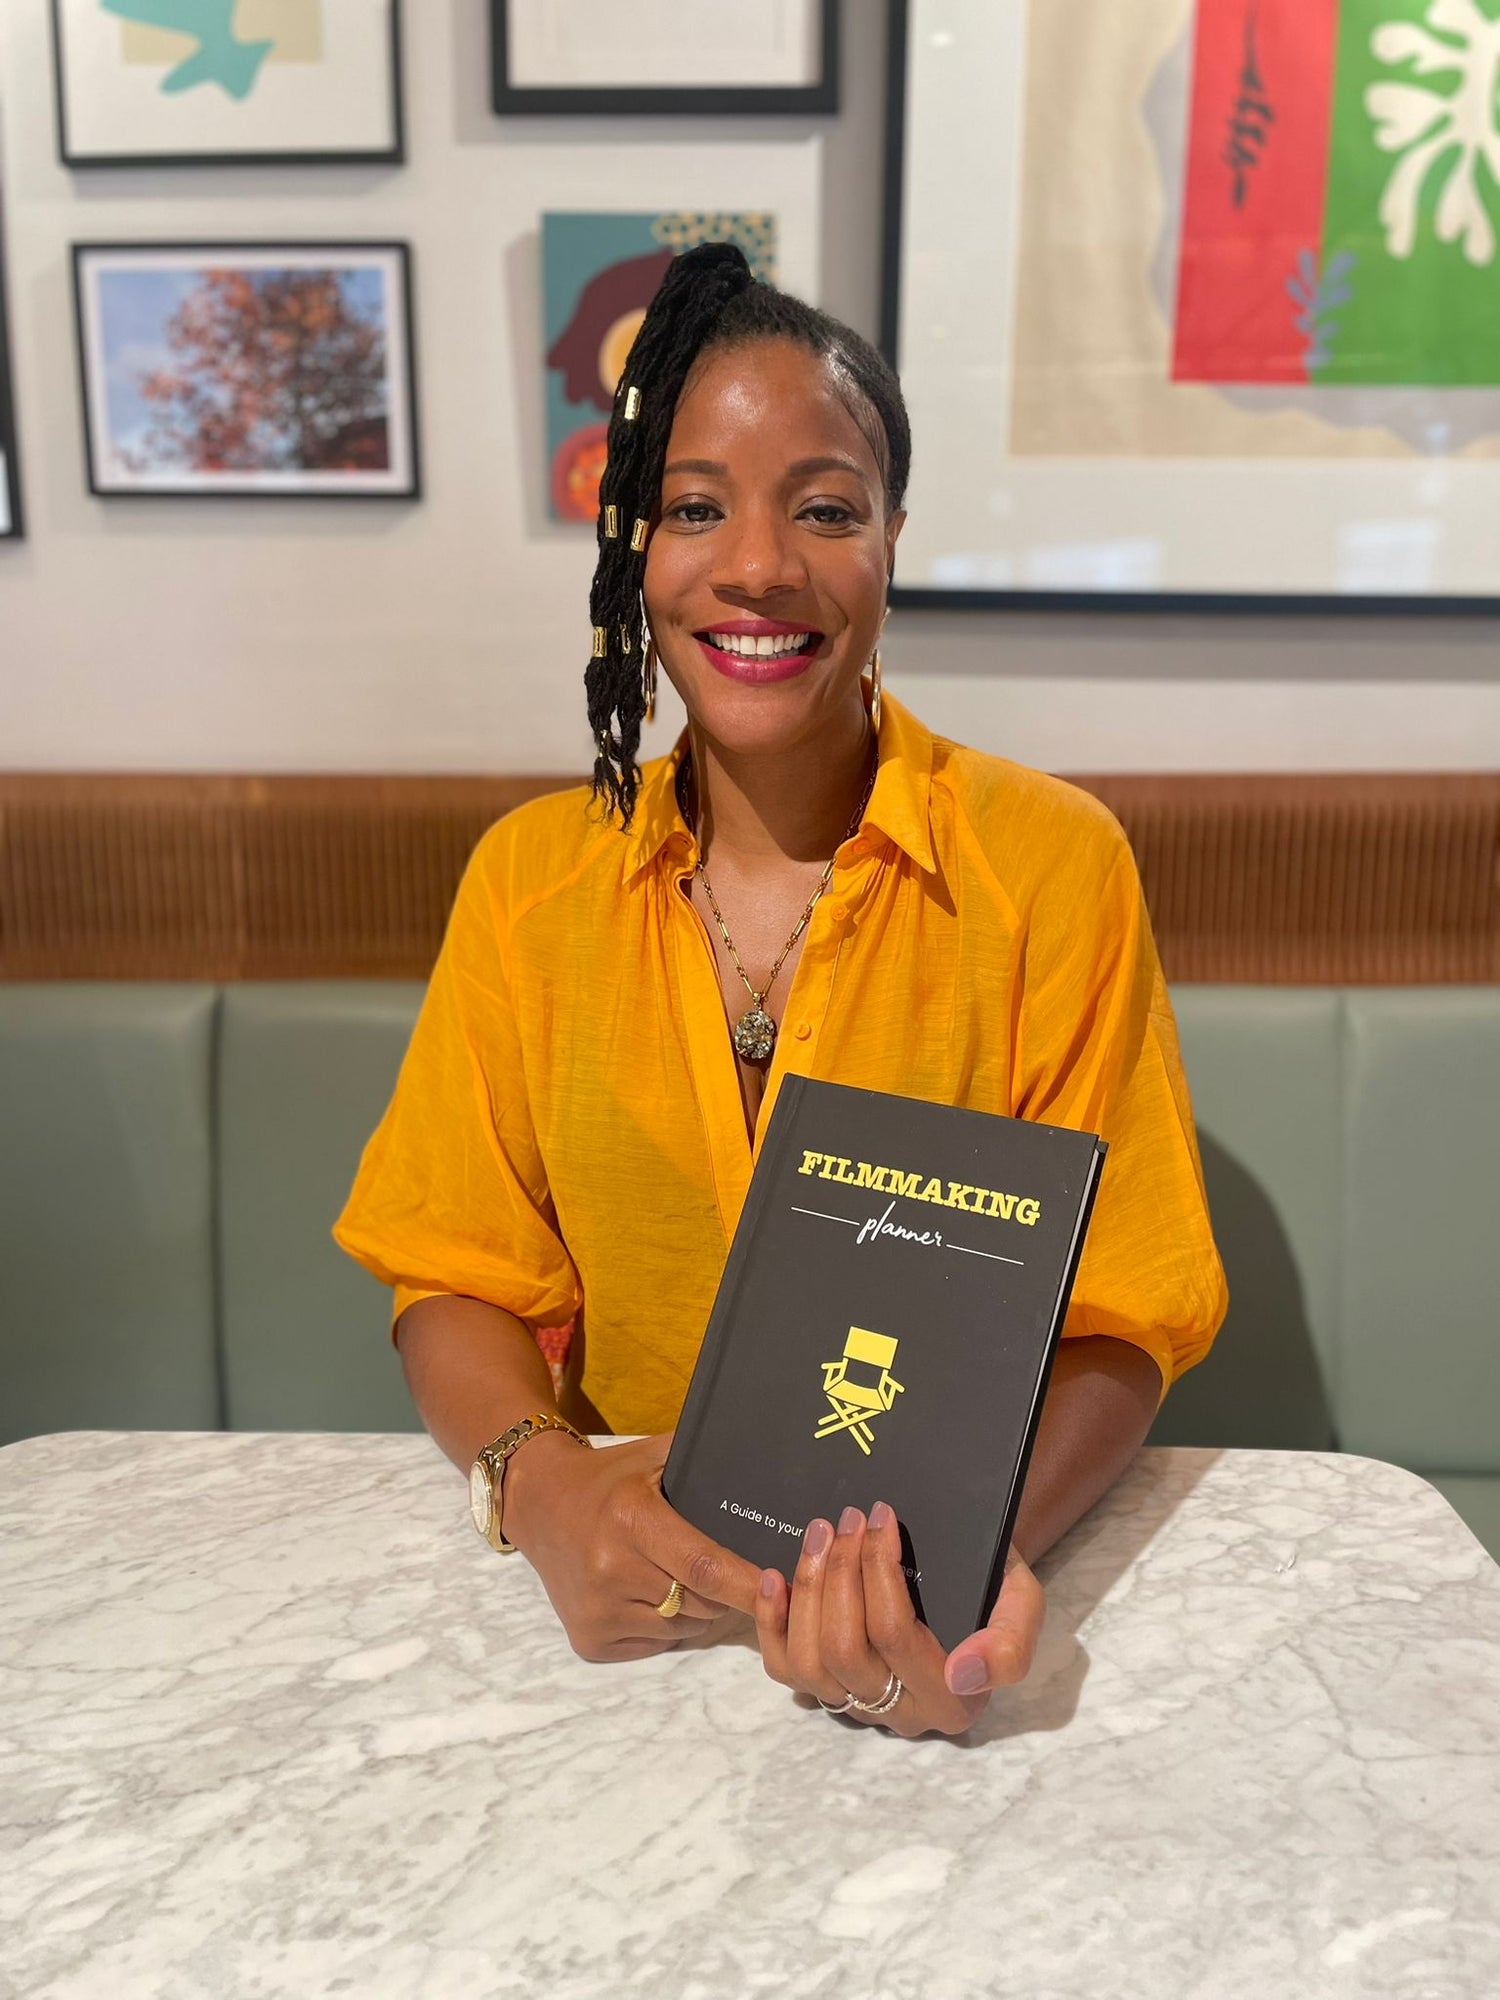 A photo of the filmmaking planner's founder, aysha scott, holding a planner in her hands, sat down at a restaurant